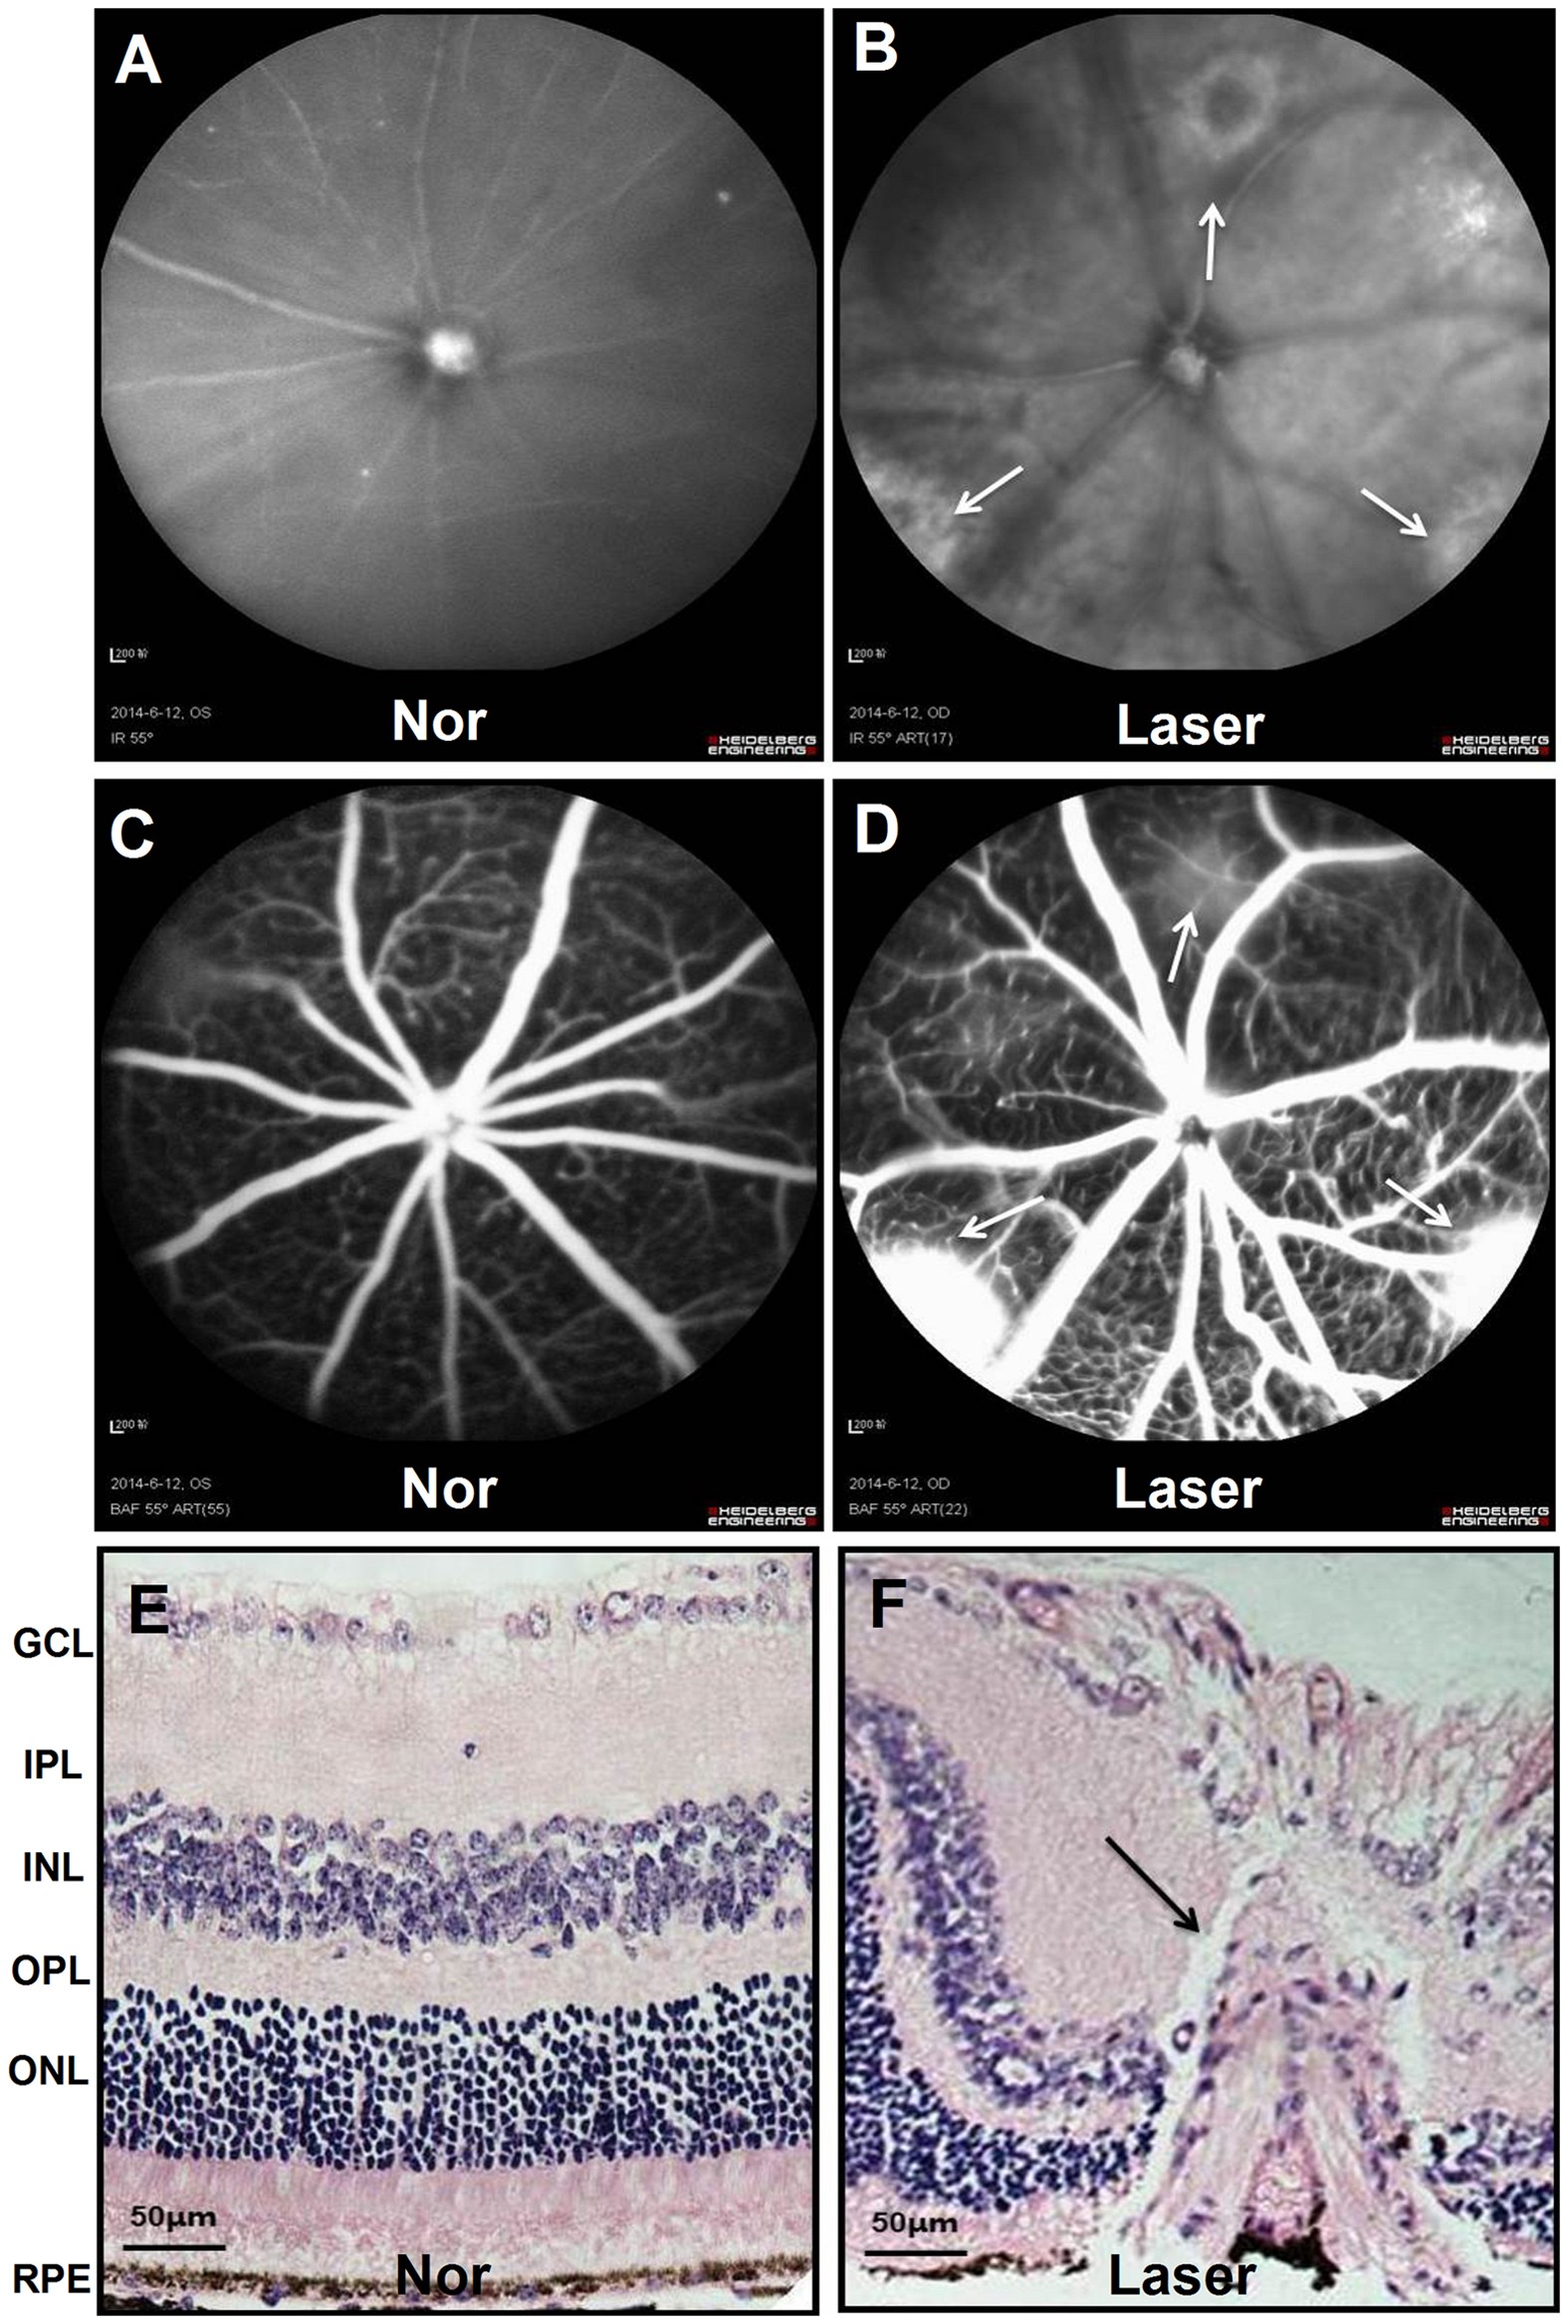 TGF-β participates choroid neovascularization through Smad2/3-VEGF/TNF-α  signaling in mice with Laser-induced wet age-related macular degeneration